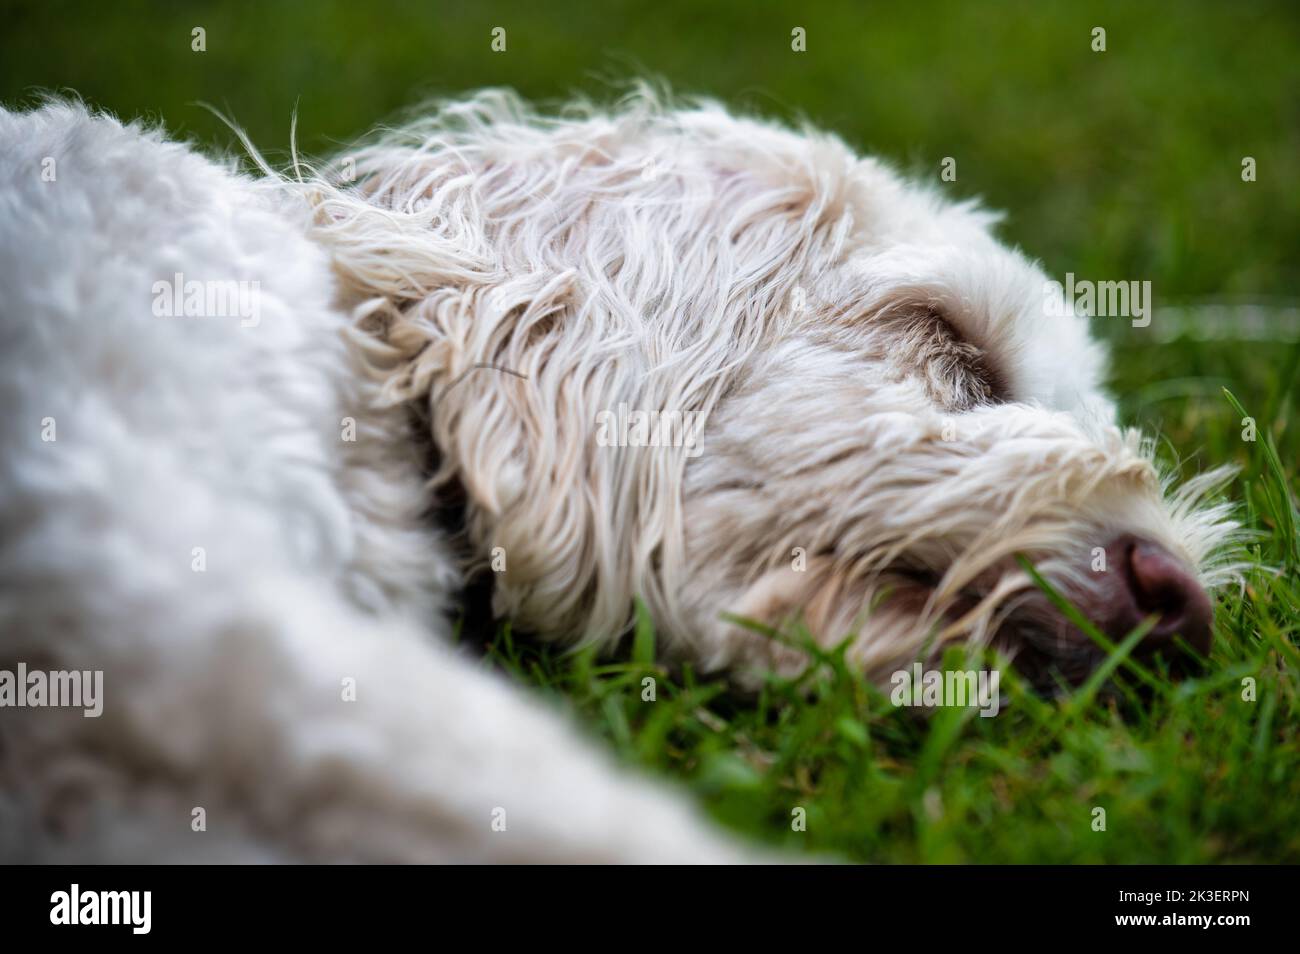 A close up picture of a white labradoodle sleeping on the grass outside Stock Photo